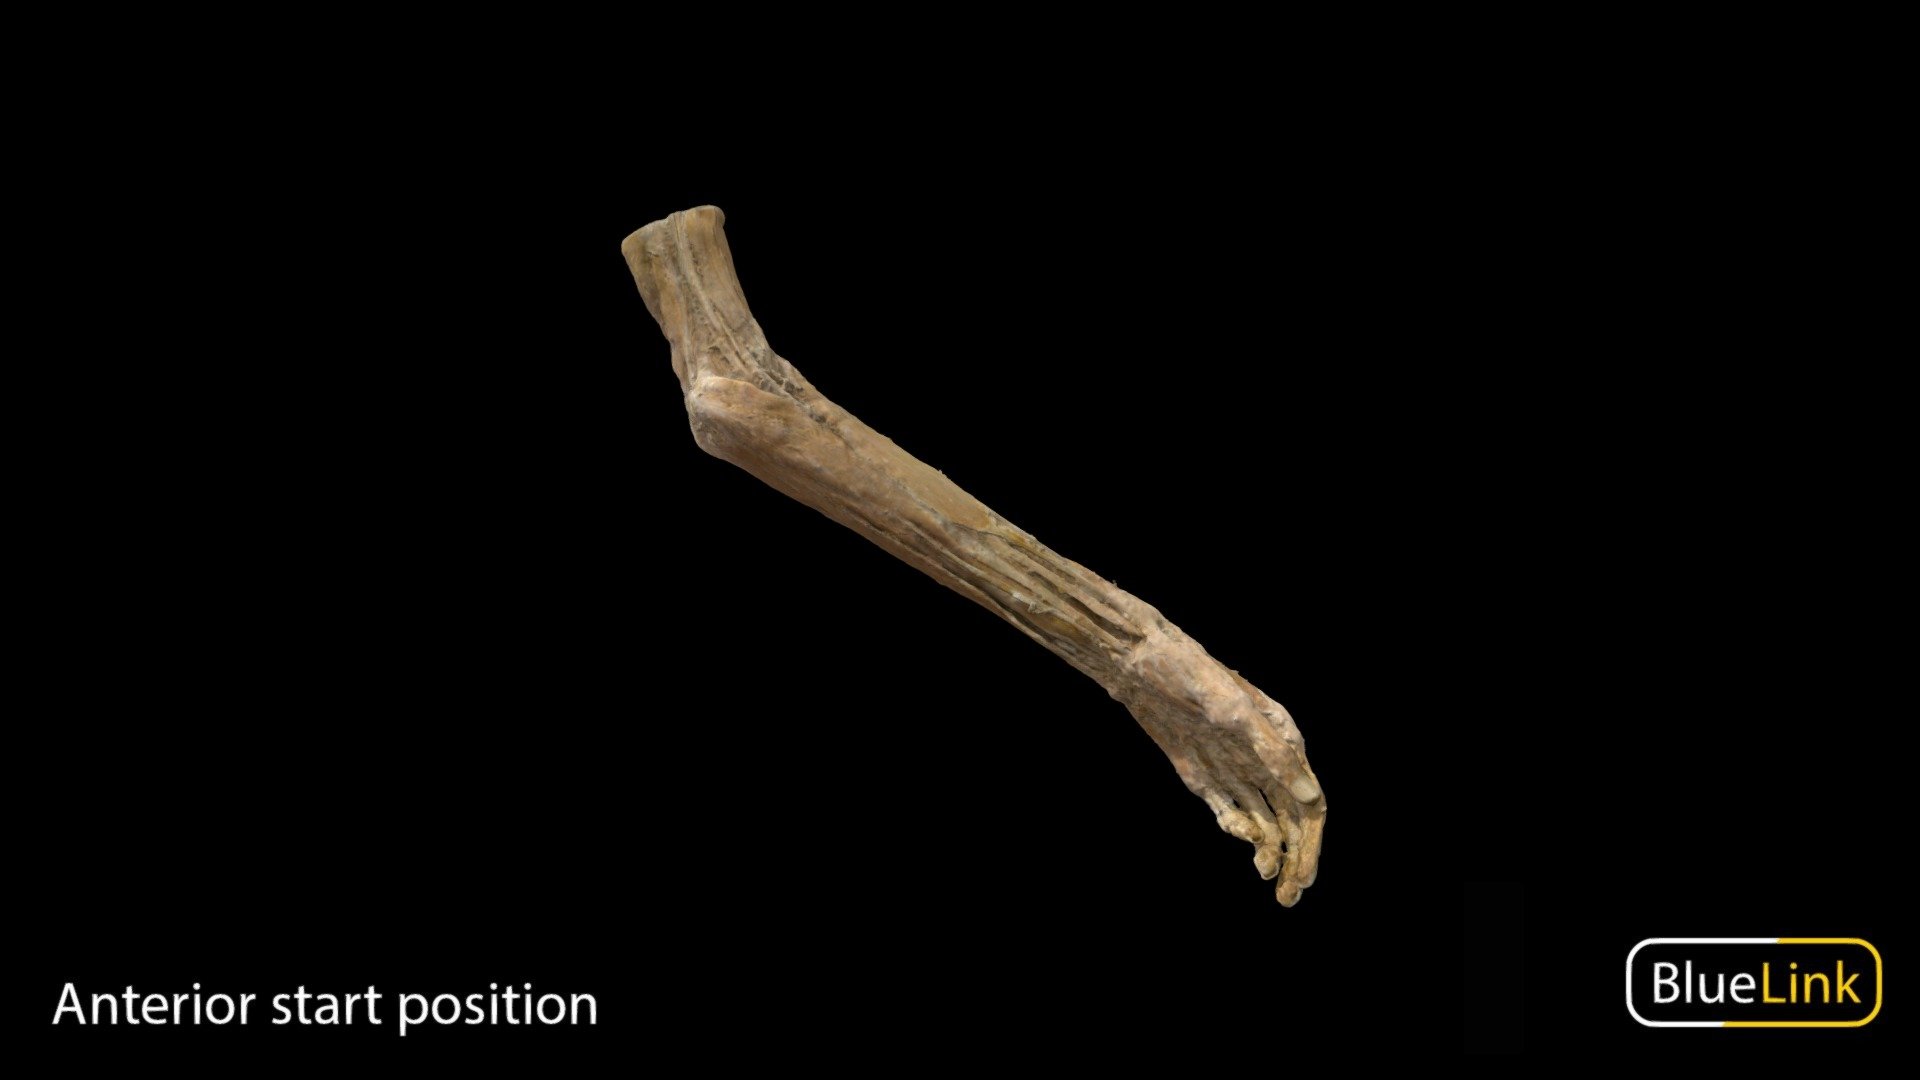 3D scan of the Bones of the right hand

Captured with Einscan Pro

Captured and edited by: Will Gribbin

Copyright2019 BK Alsup &amp; GM Fox

ID 29012-U05 - Left Arm Superficial Compartment - 3D model by Bluelink Anatomy - University of Michigan (@bluelinkanatomy) 3d model